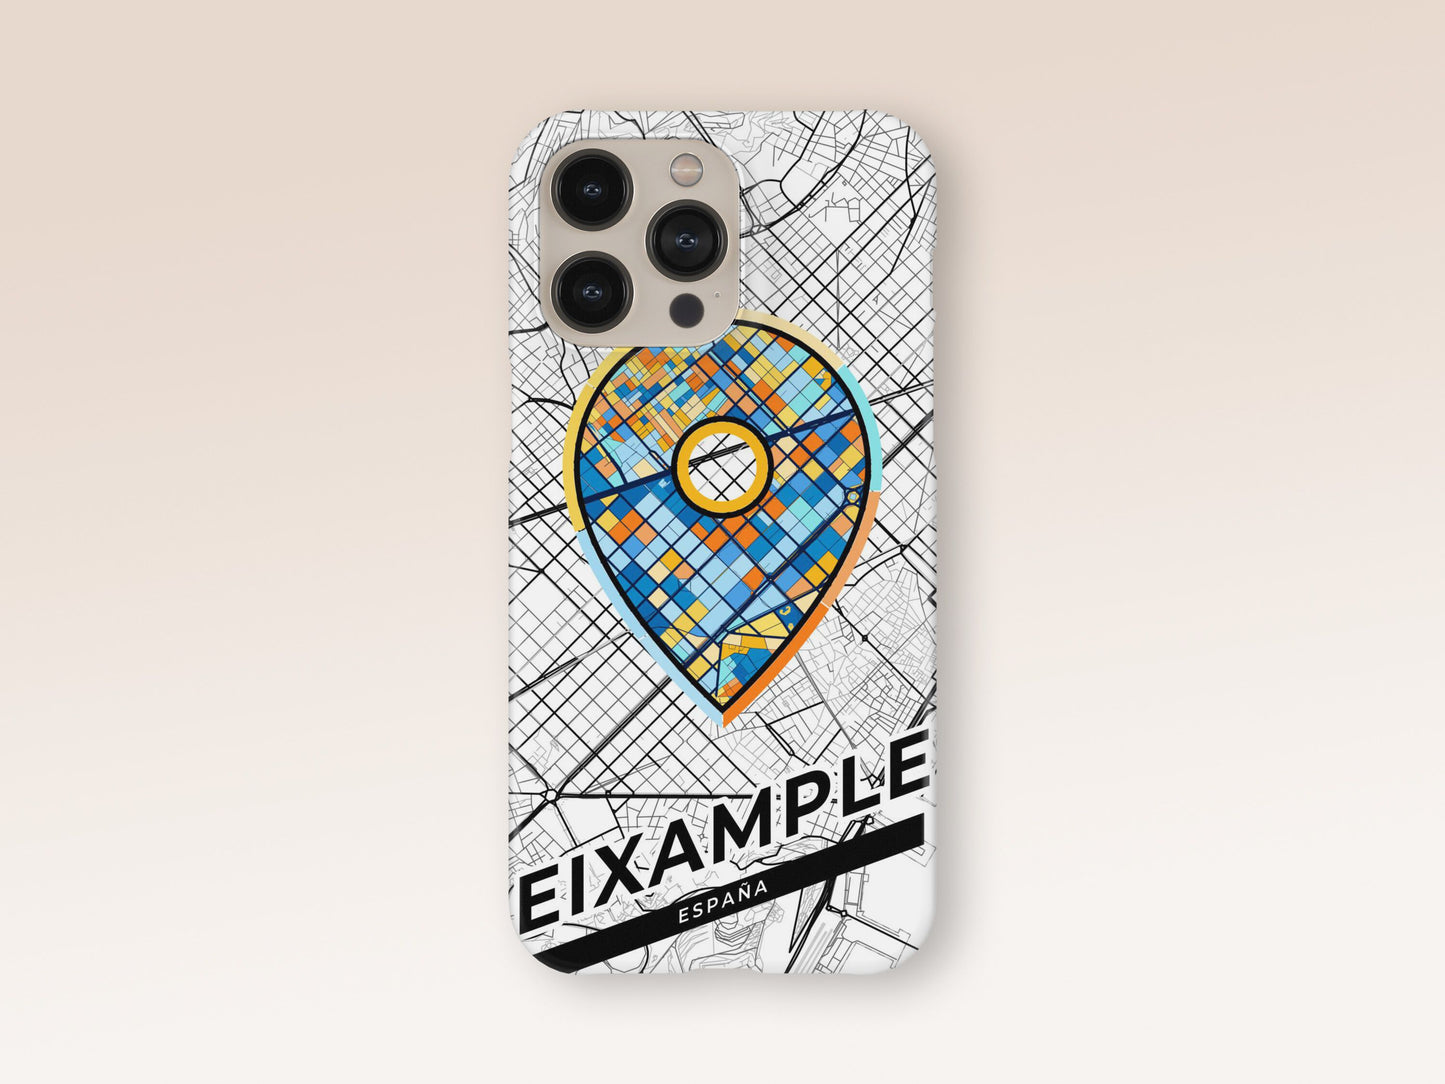 Eixample Spain slim phone case with colorful icon. Birthday, wedding or housewarming gift. Couple match cases. 1